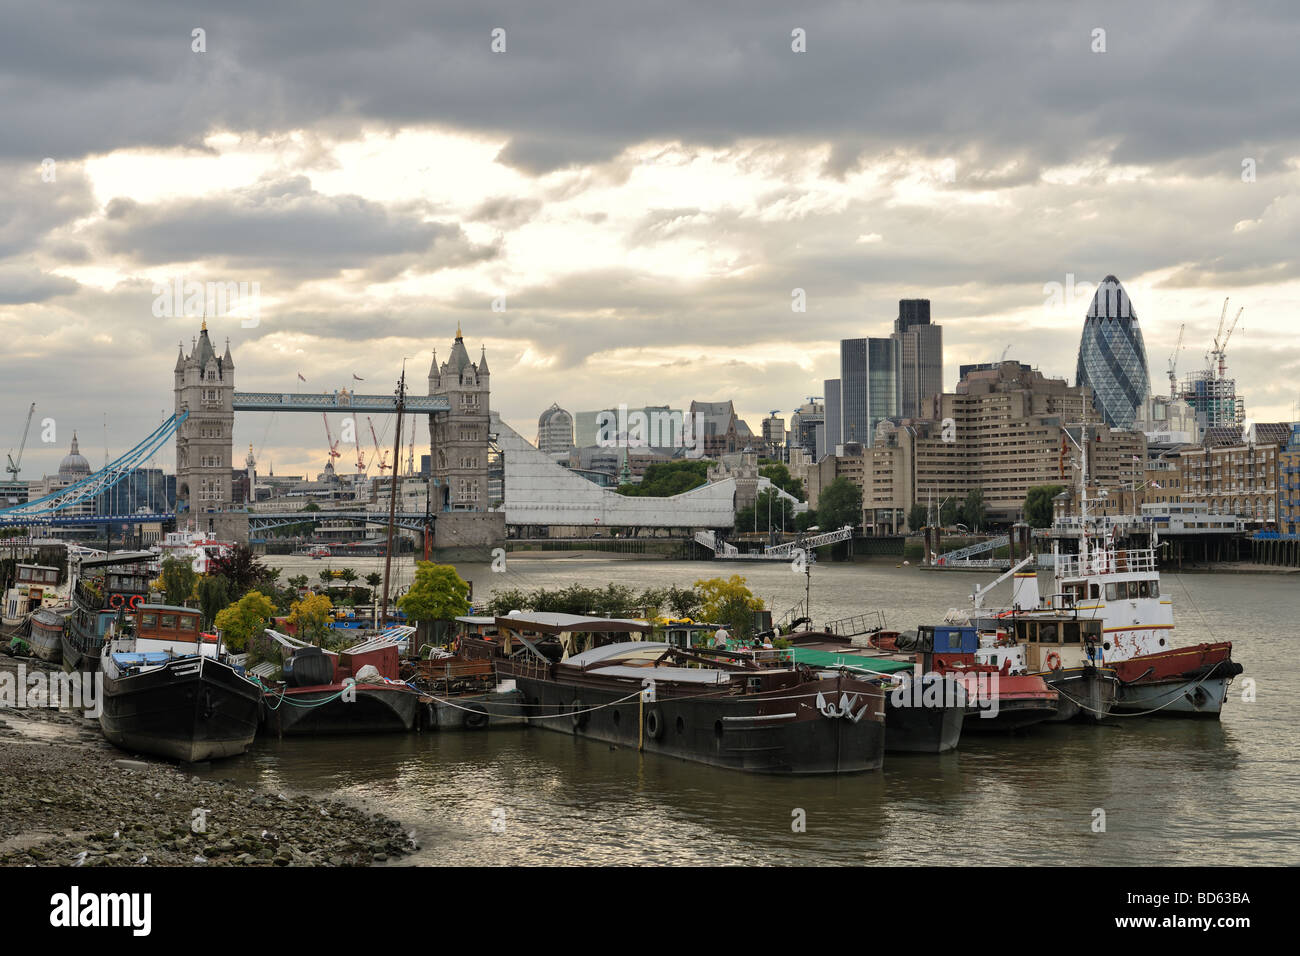 Houseboats moored on the south bank of the River Thames London with Tower Bridge and dramatic skiy in the background Stock Photo